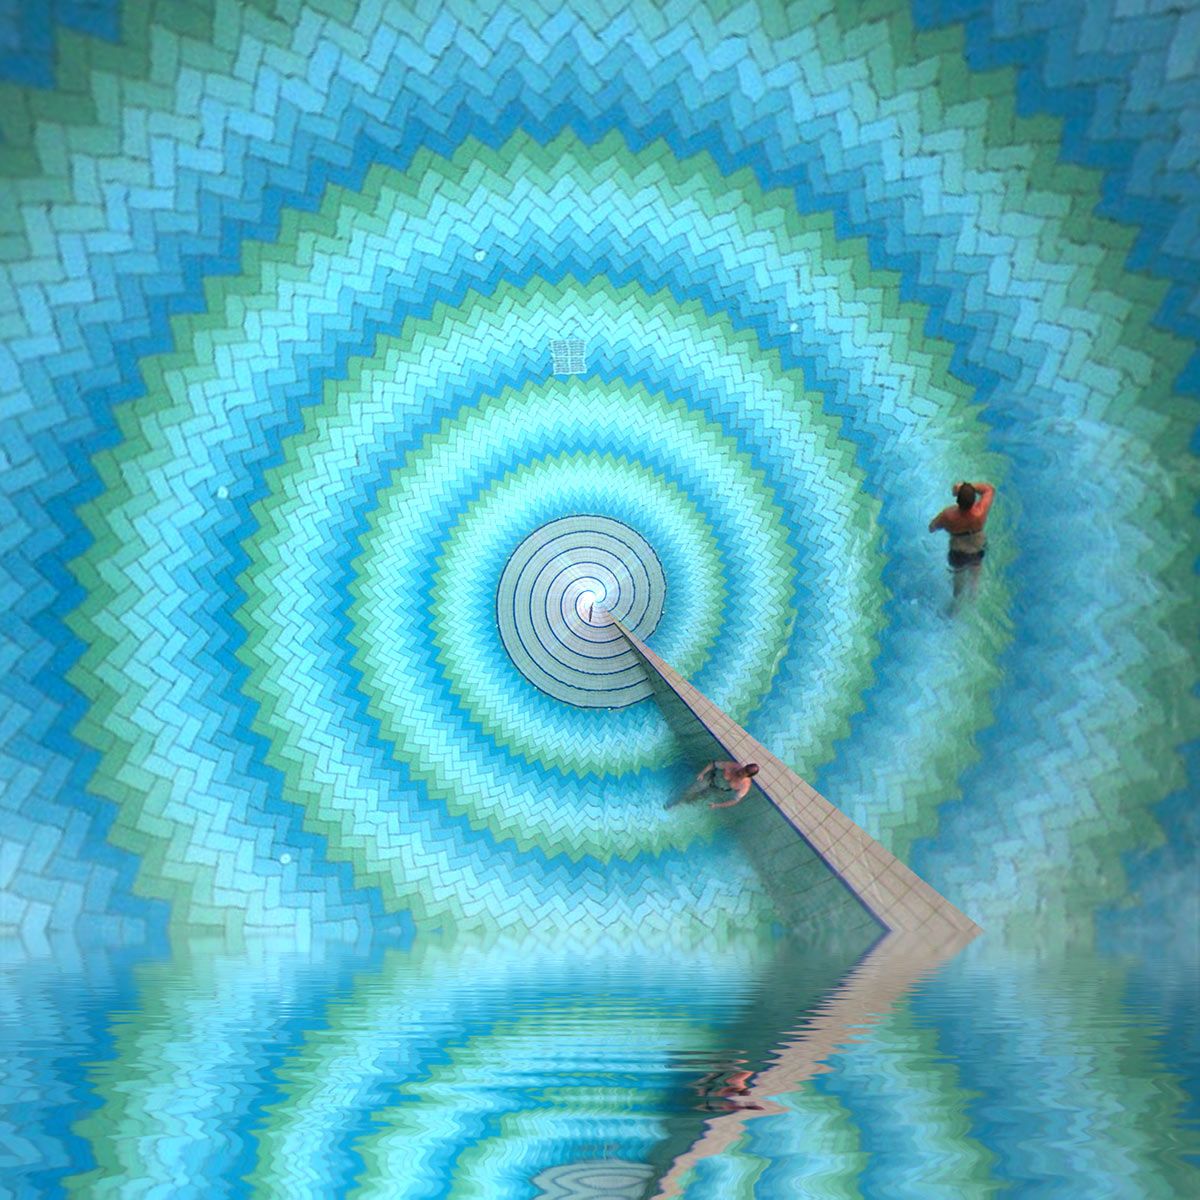 Reflection on a spiral transformation